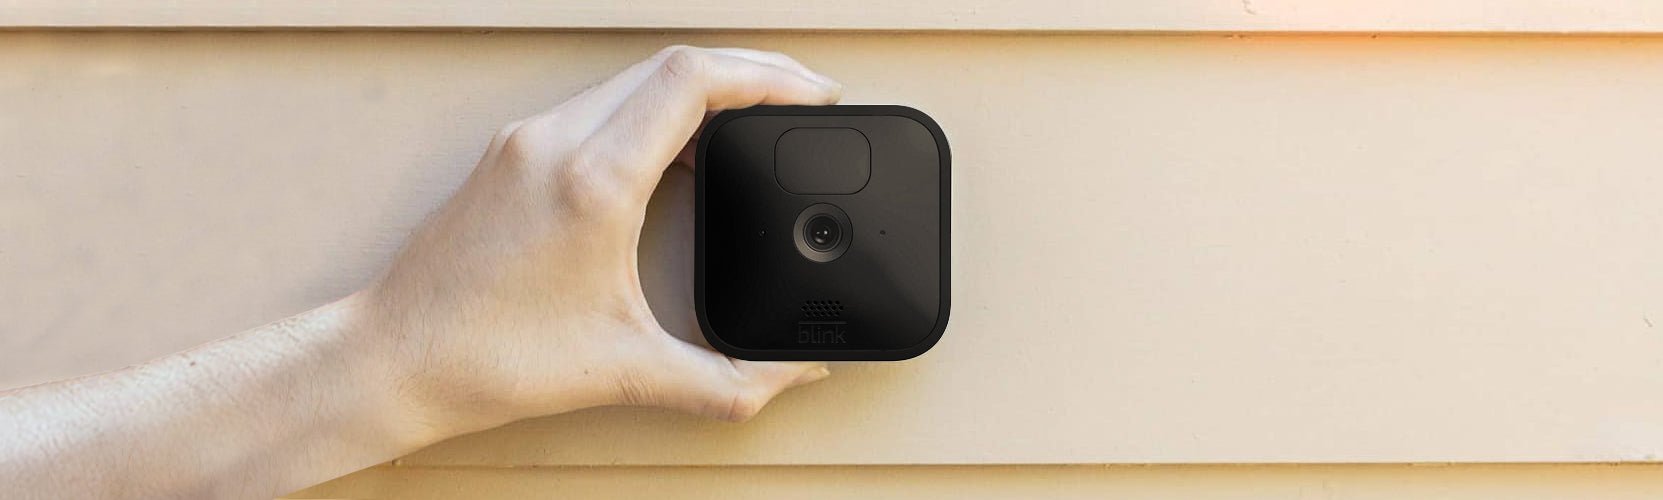 How to Set Up and Install a Blink Smart Camera : HelloTech How